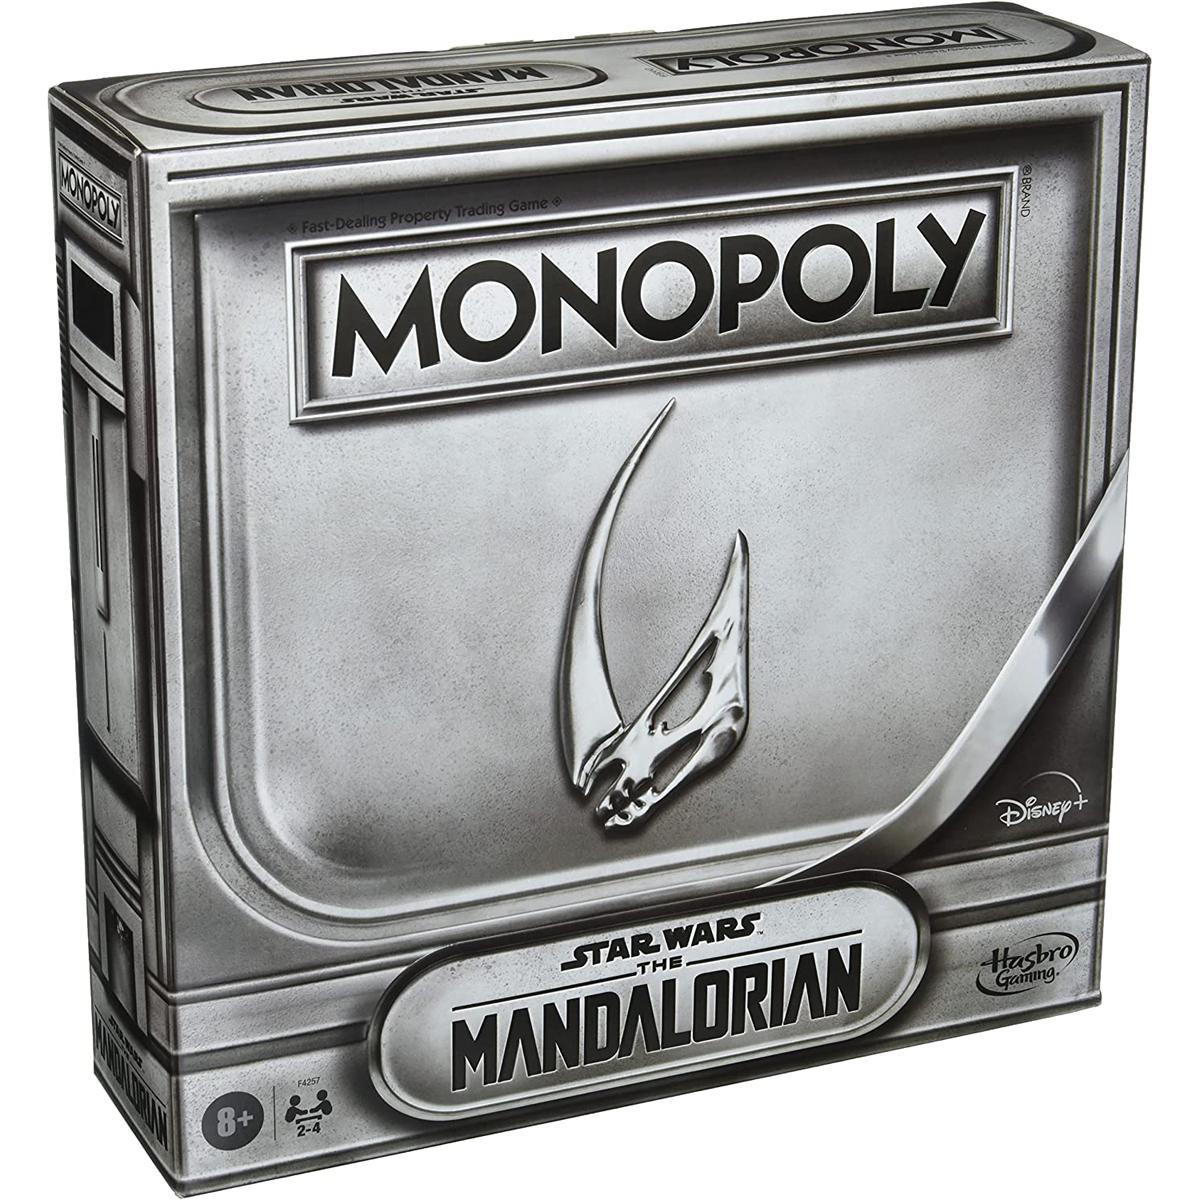 Monopoly Star Wars The Mandalorian Edition Board Game for $18.90